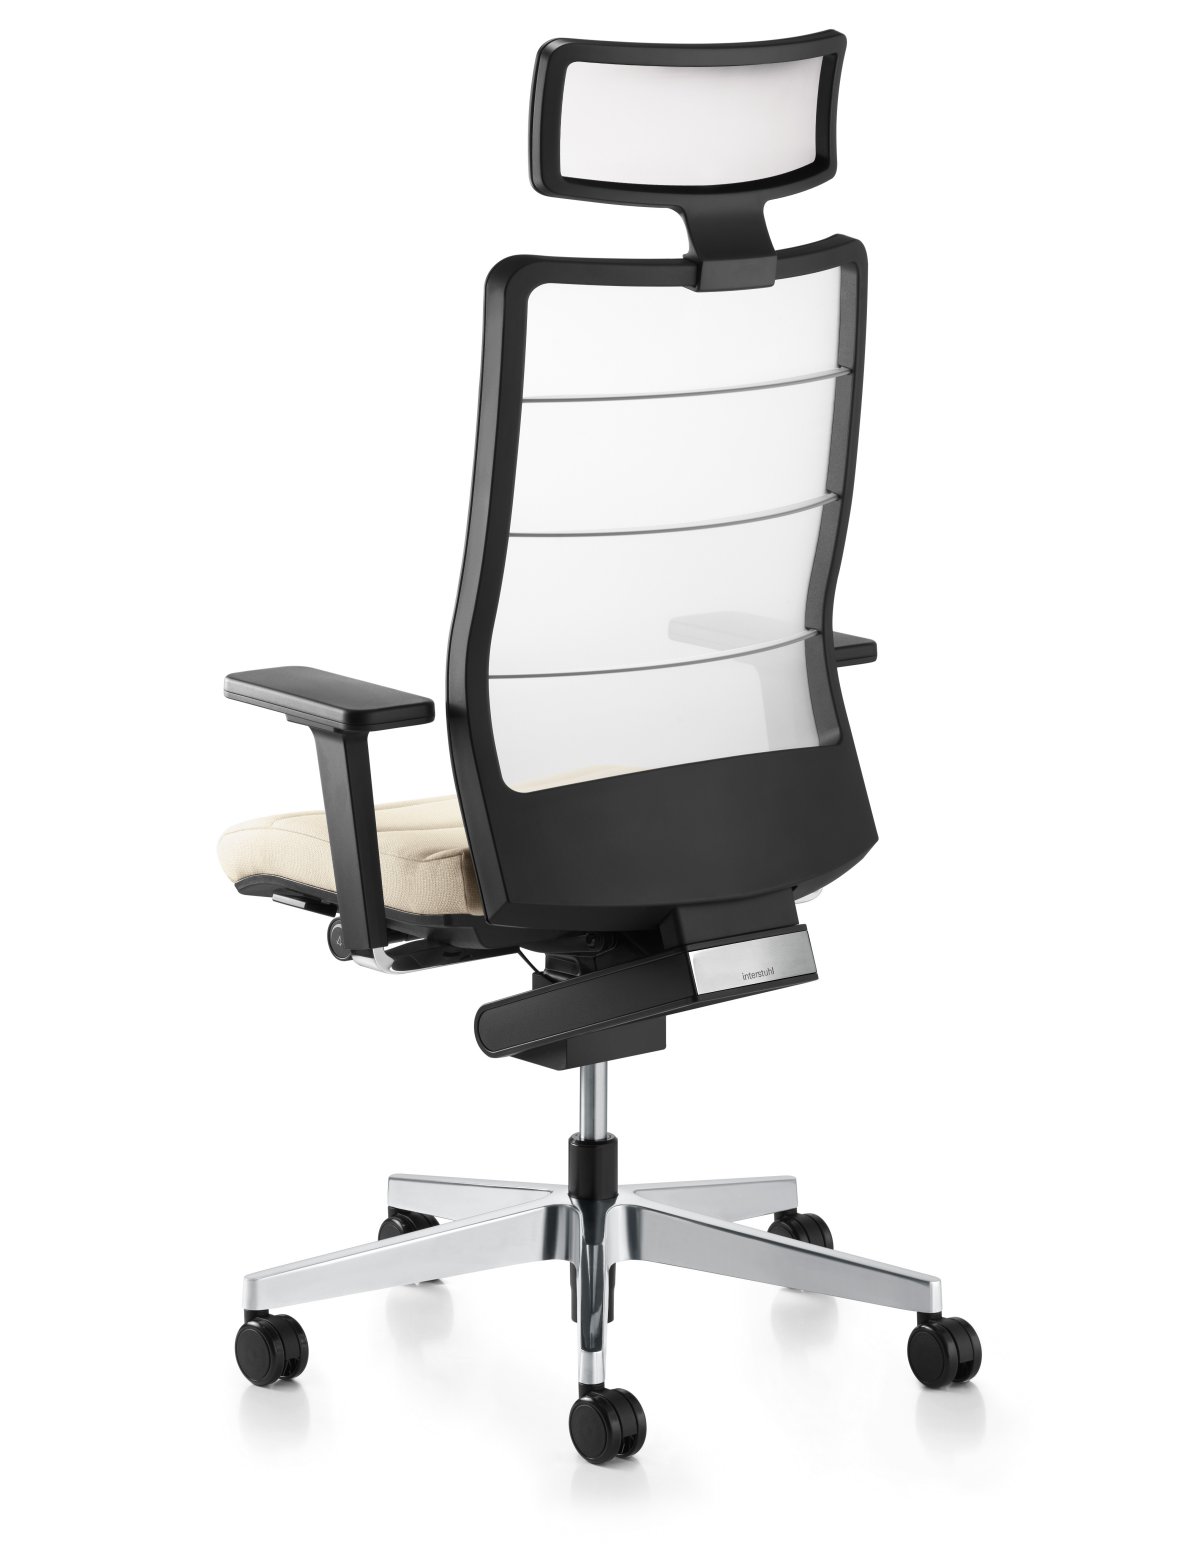 Airpad 3c72 Series Executive Chair By Interstuhl Ergocanada Detailed Specification Page